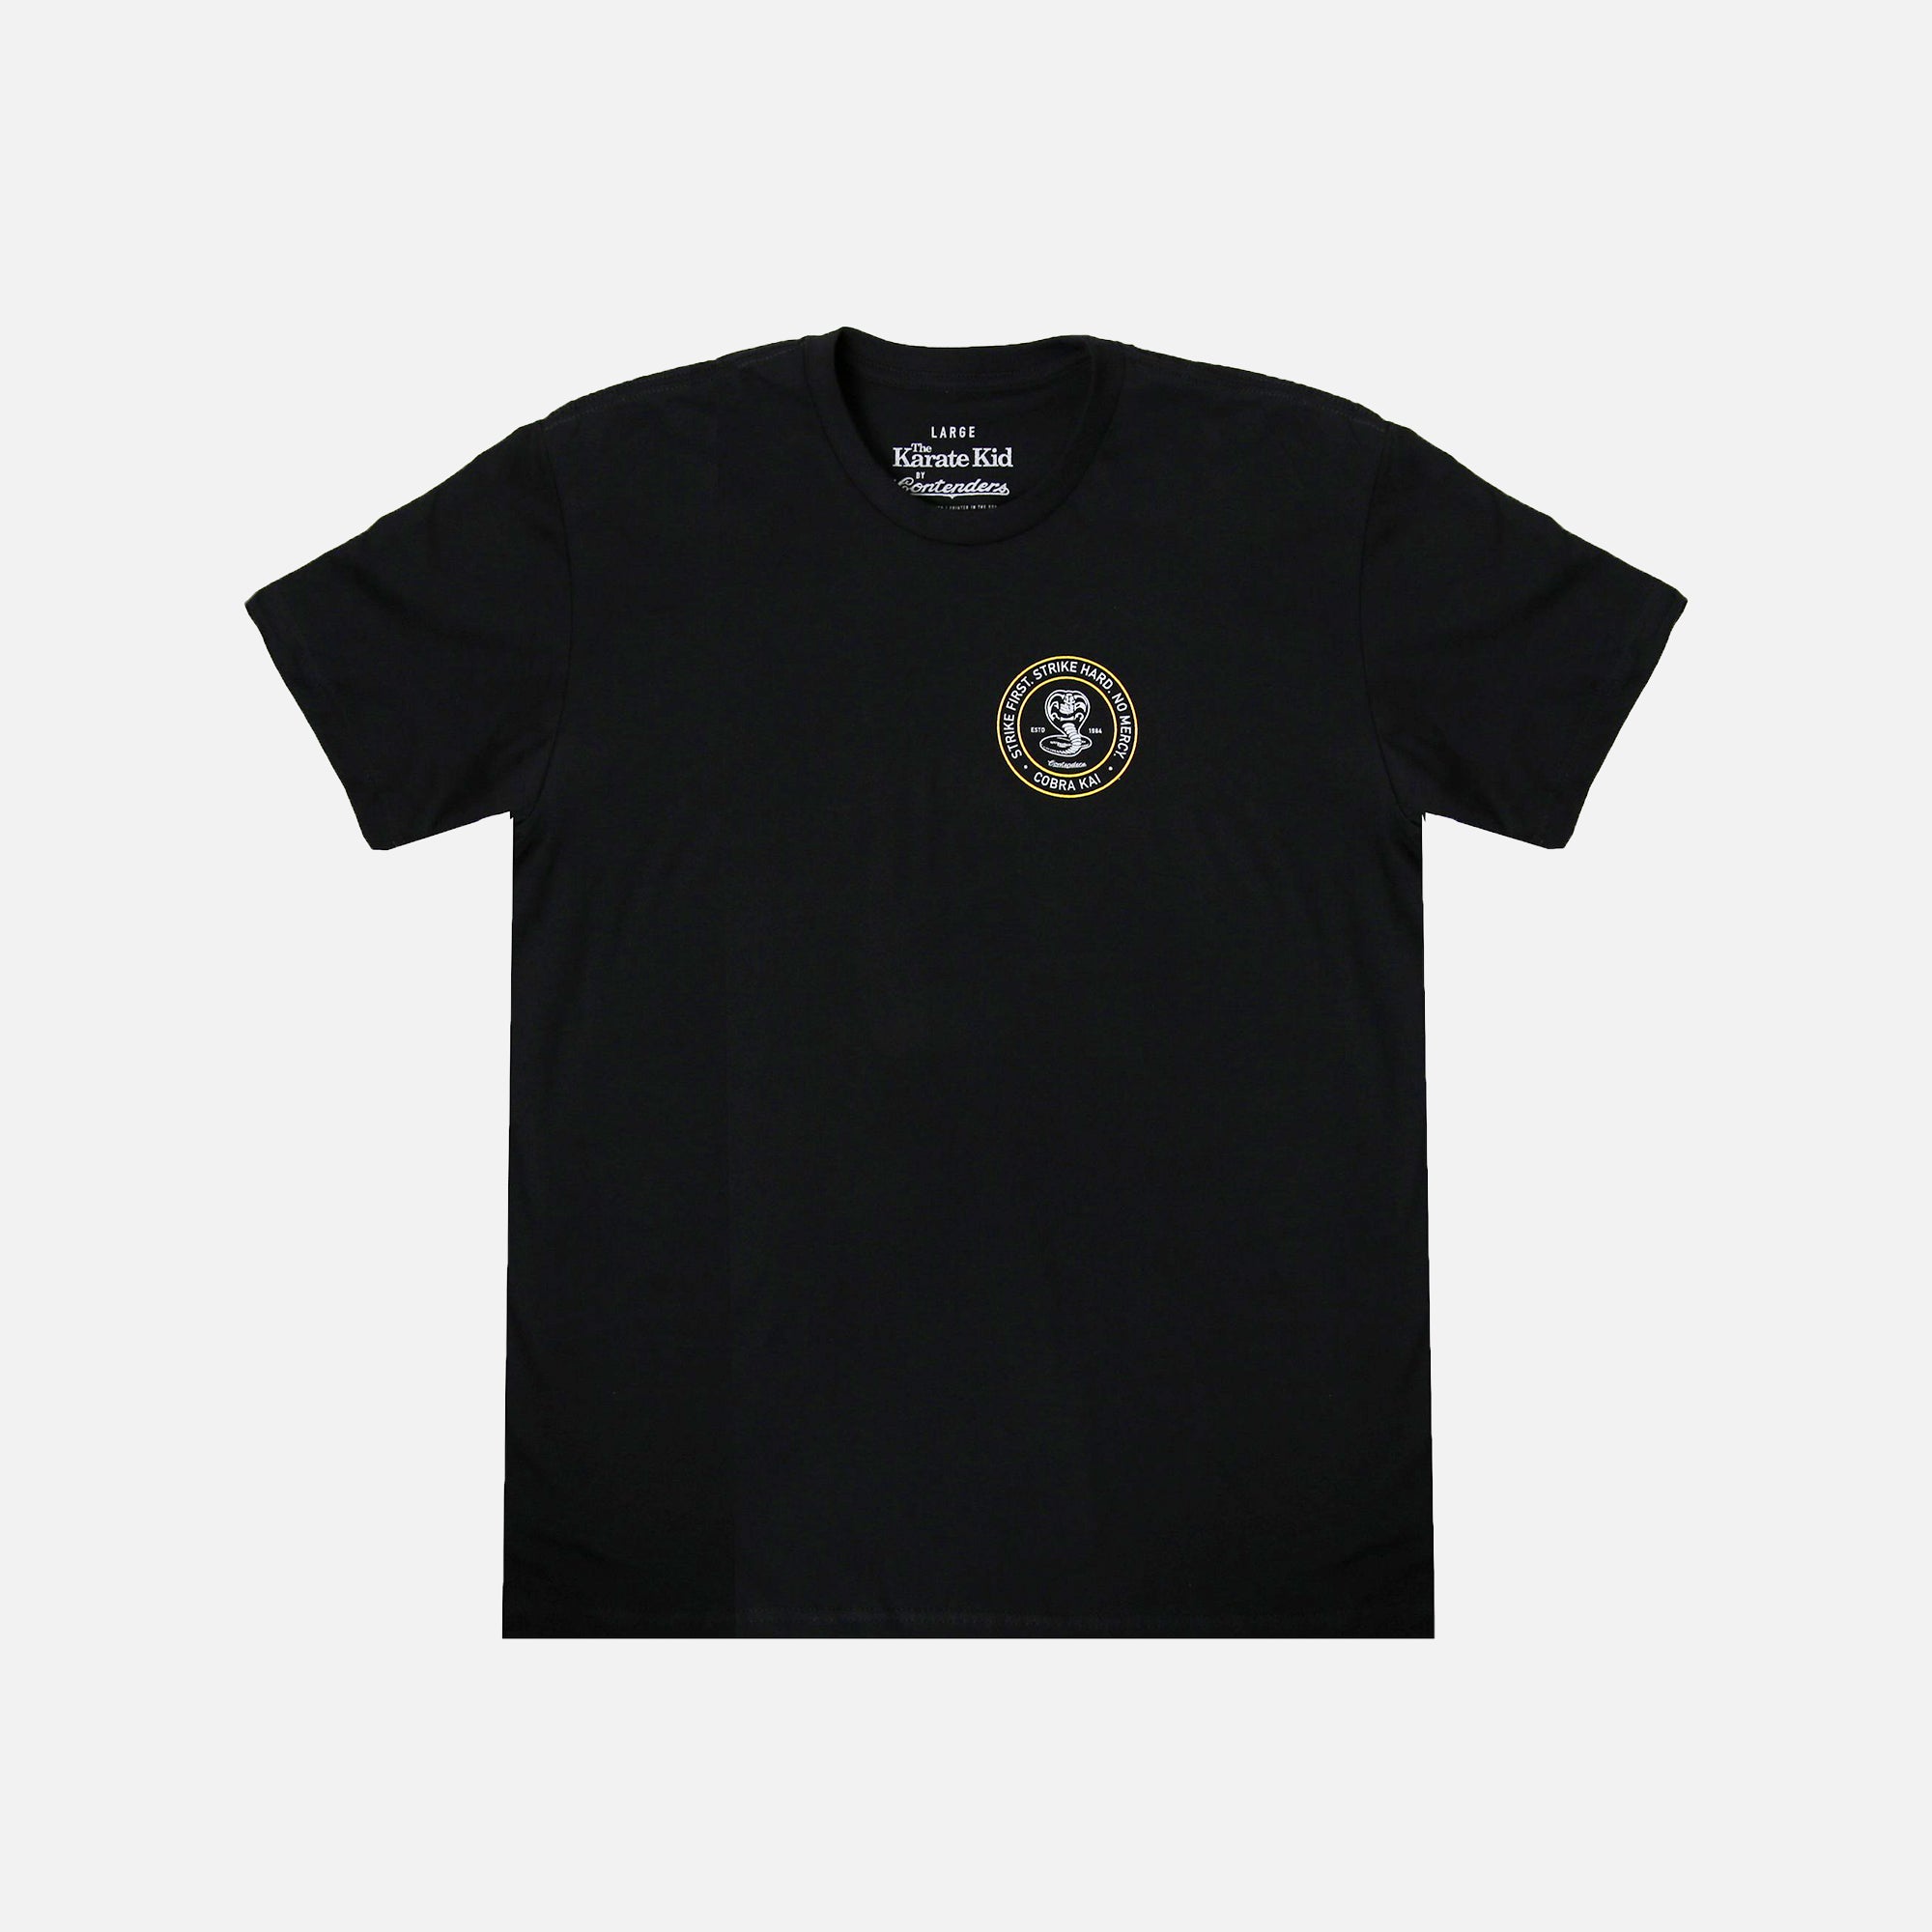 Contenders Clothing | Cobra Kai Collection